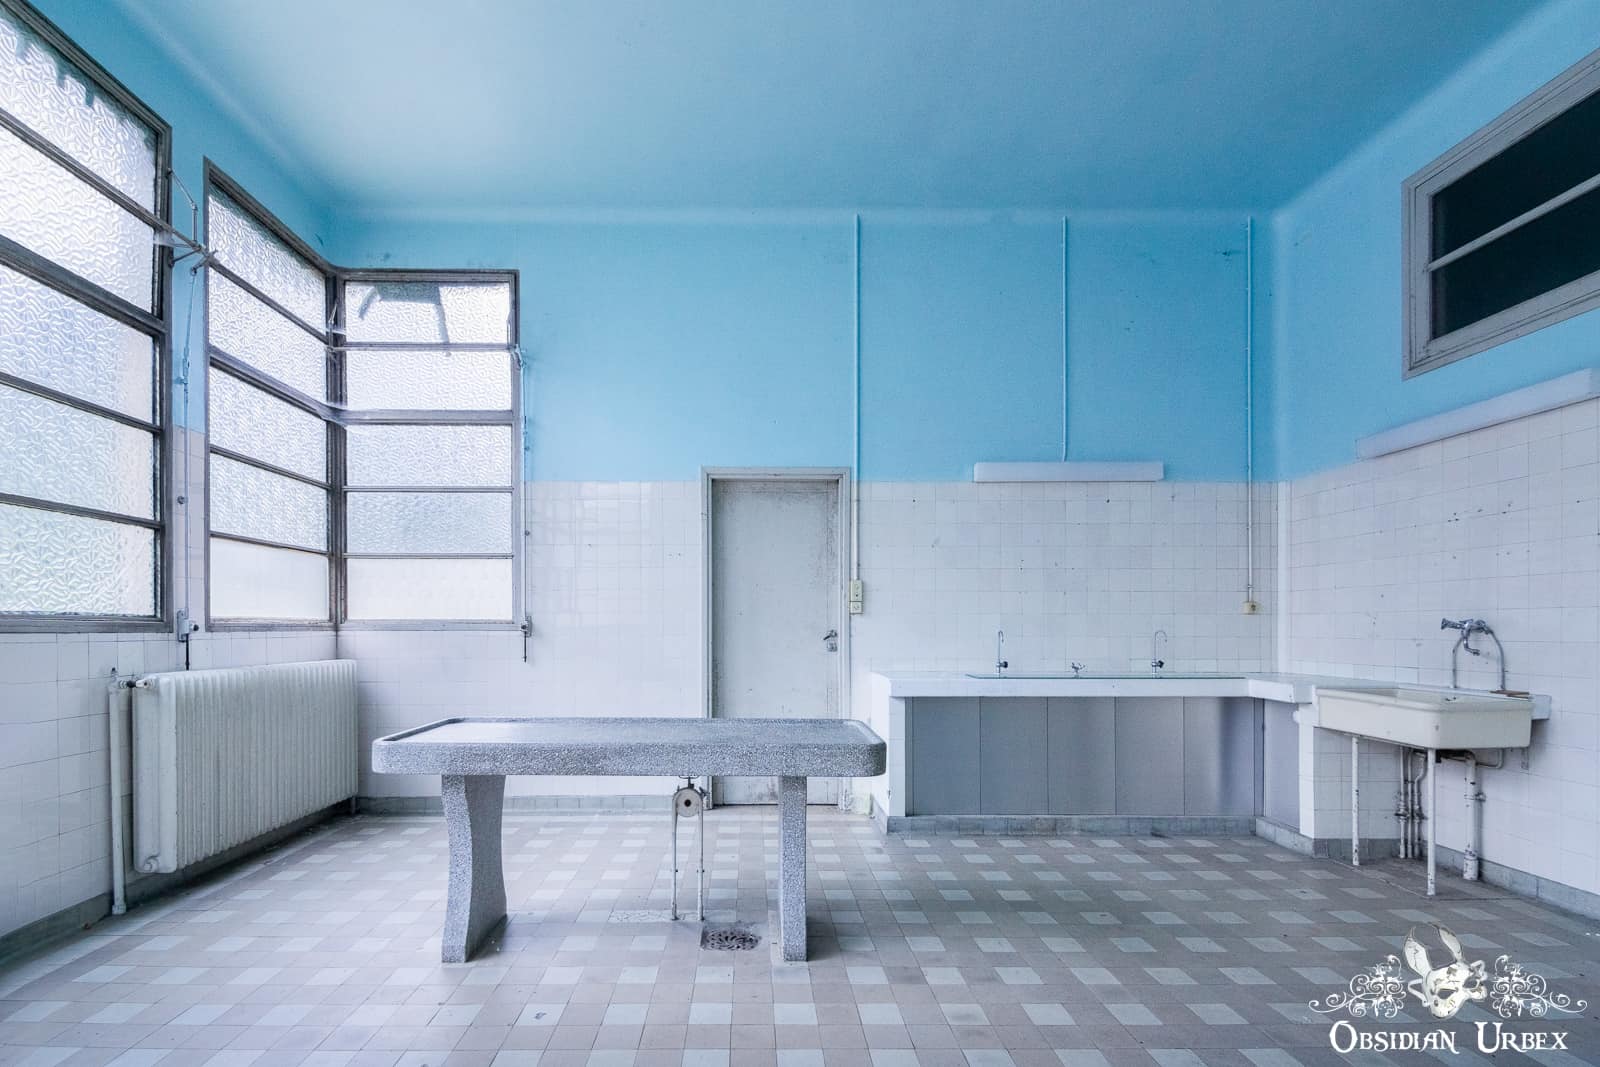 11_la-morgue-prelude-the-blue-morgue-france-body-slab-and-sink-in-abandoned-hospital